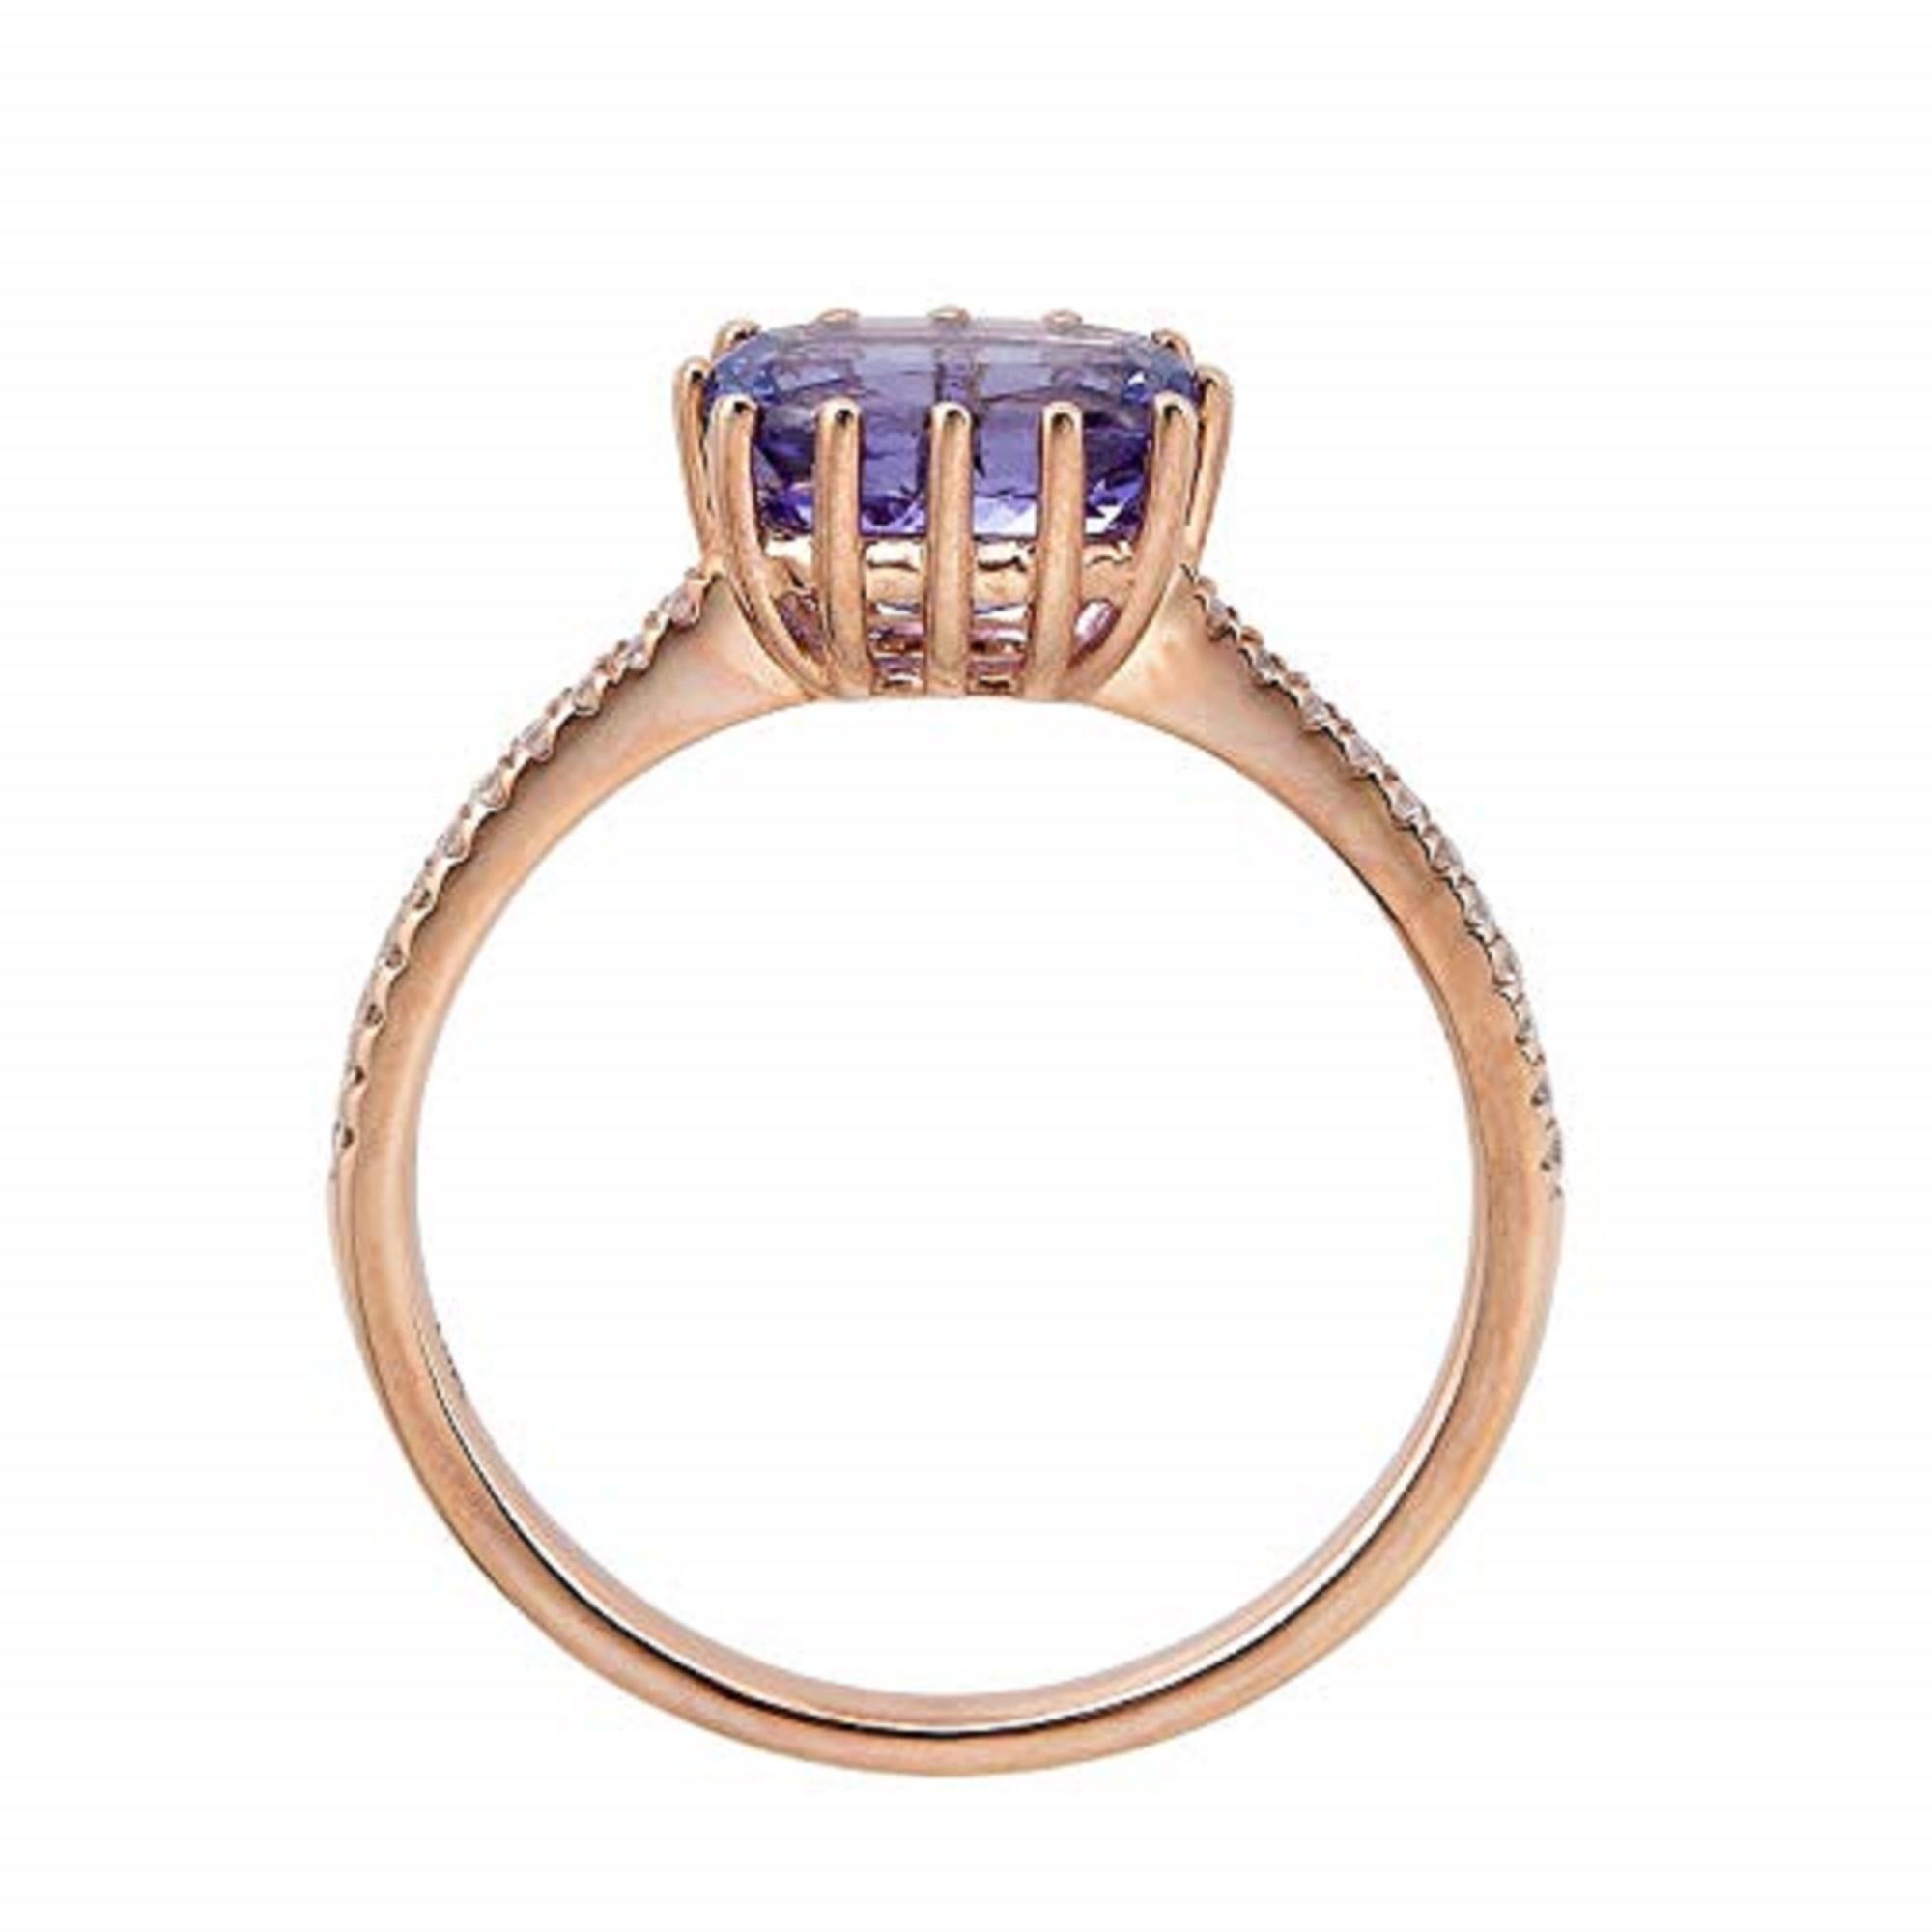 Stunning, timeless and classy eternity Unique ring. Decorate yourself in luxury with this Gin & Grace ring. This ring is made up of 6X8 Cushion-Cut Prong Setting Genuine Tanzanite (1pcs) 1.48 Carat and Round-Cut Prong Setting Natural Diamond (22pcs)